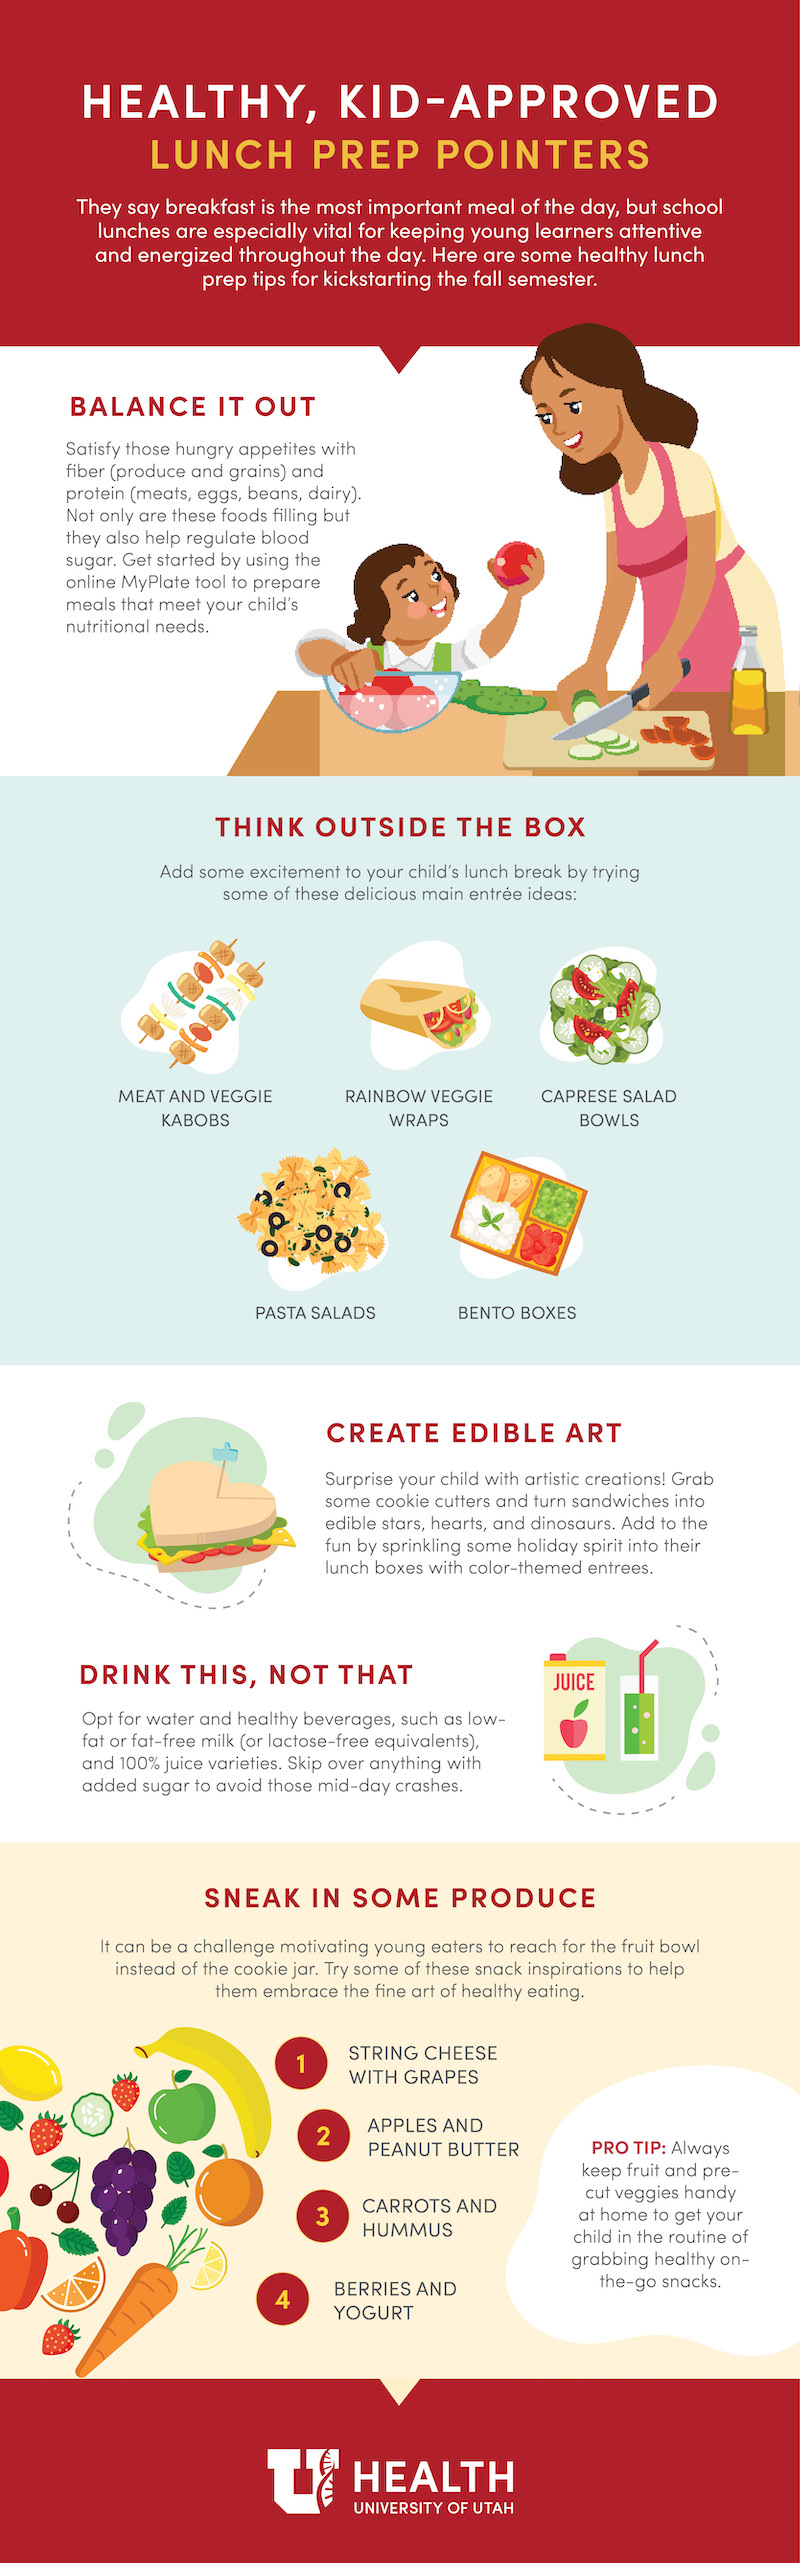 Healthy School Lunches Infographic